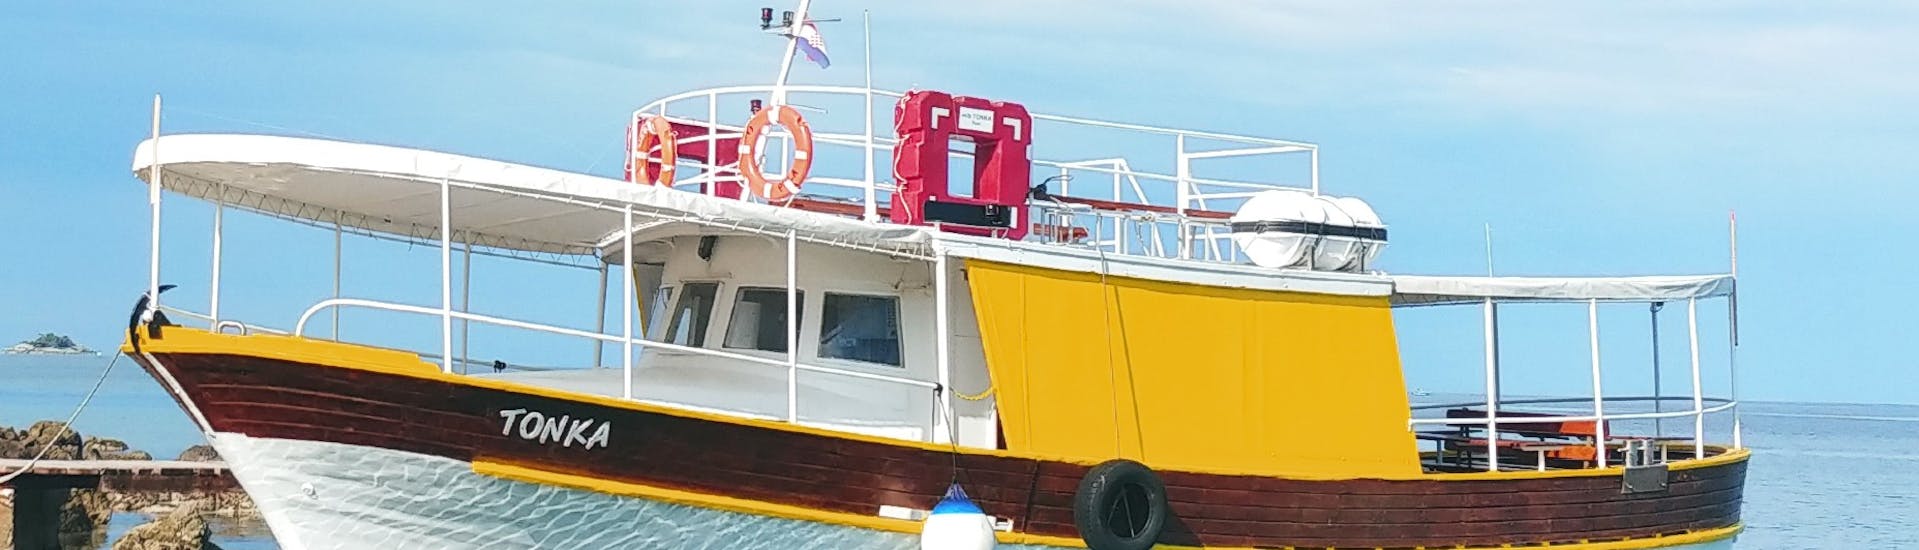 Picture of the boat called Tonka during the boat tour around Rovinj with swimming hosted by Boat Excursions Tonka Rovinj.